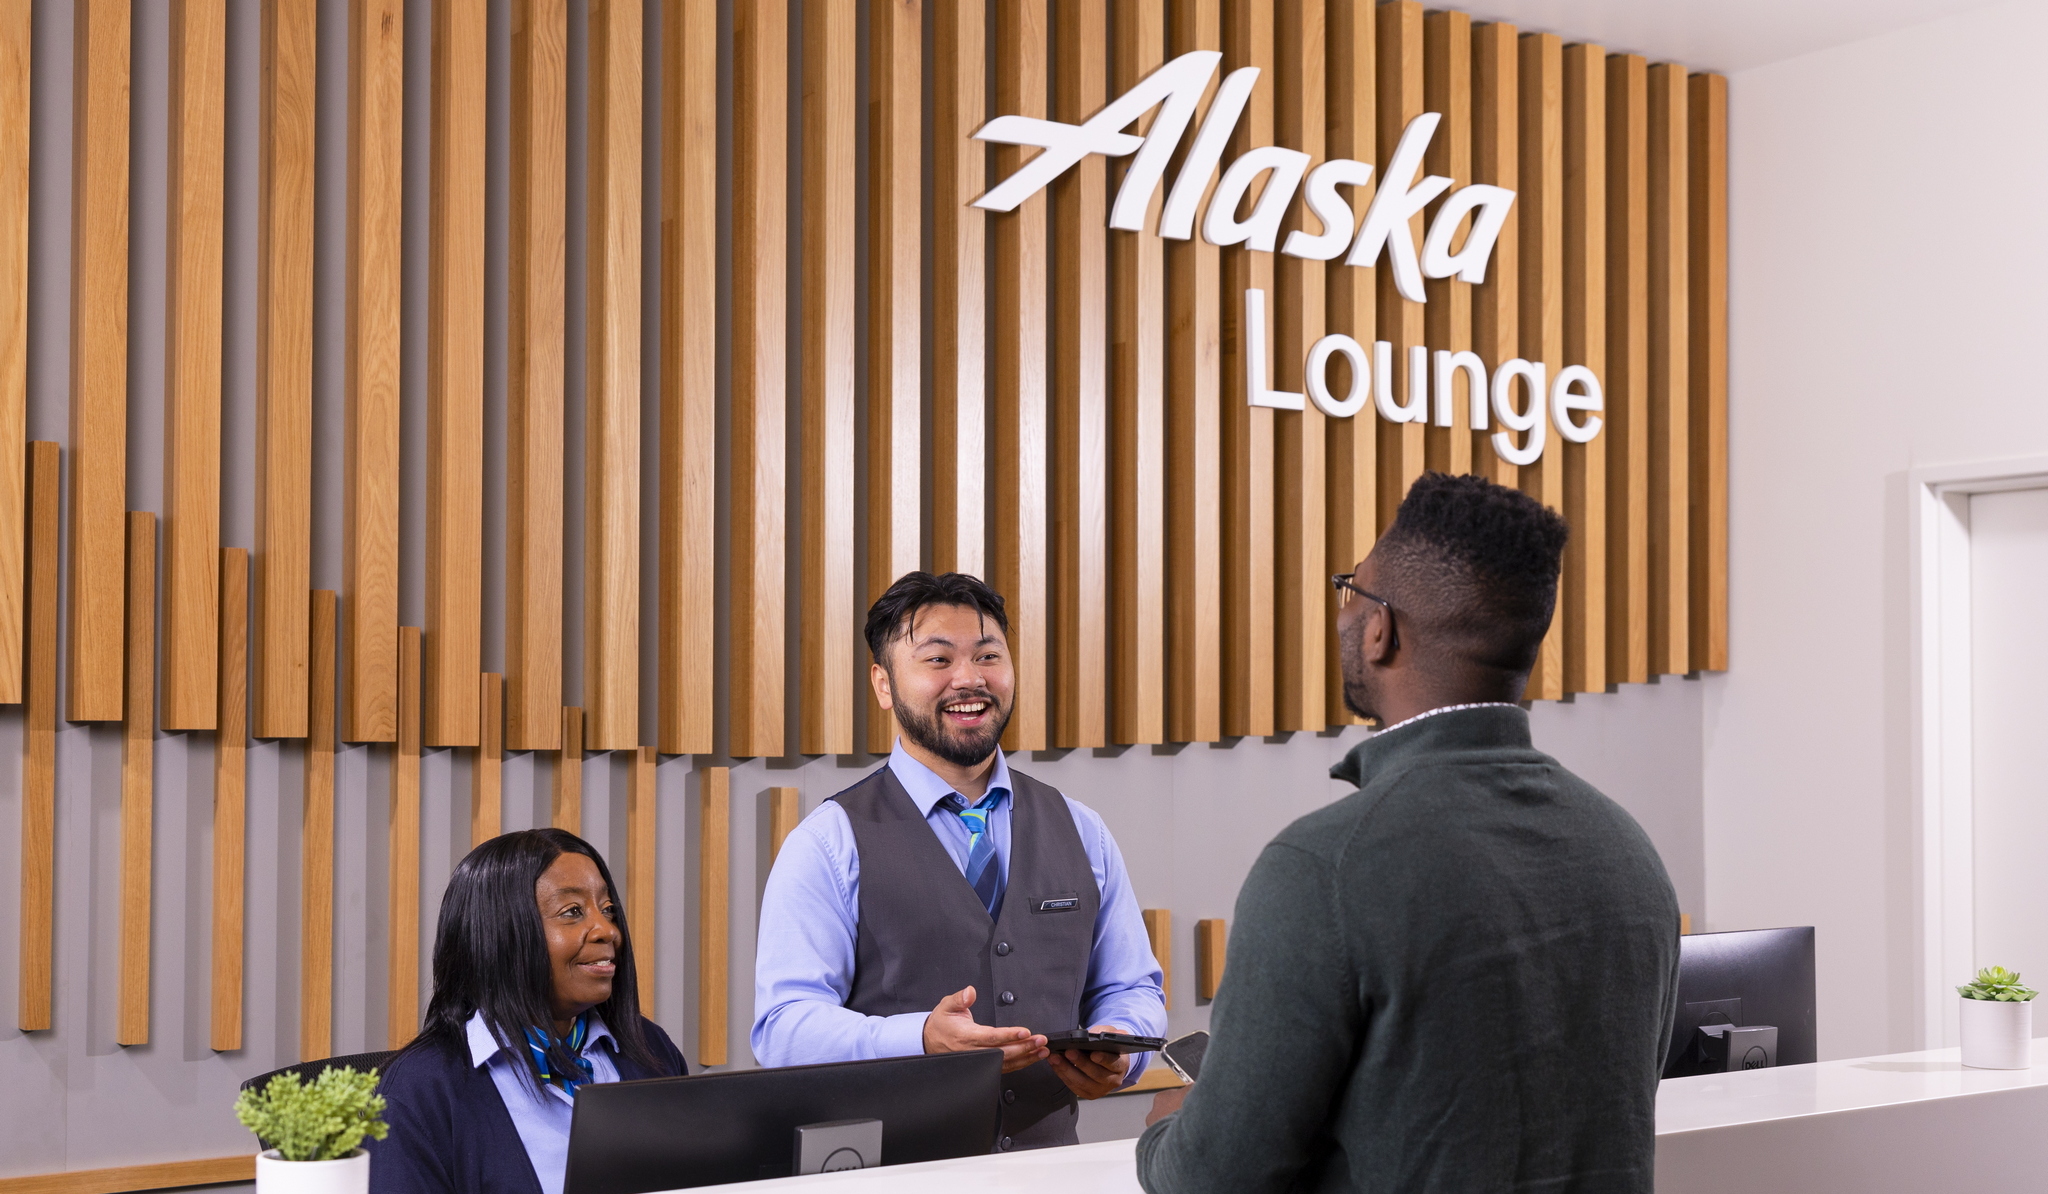 Two customer service agents at Alaska Airlines lounge helping customer.